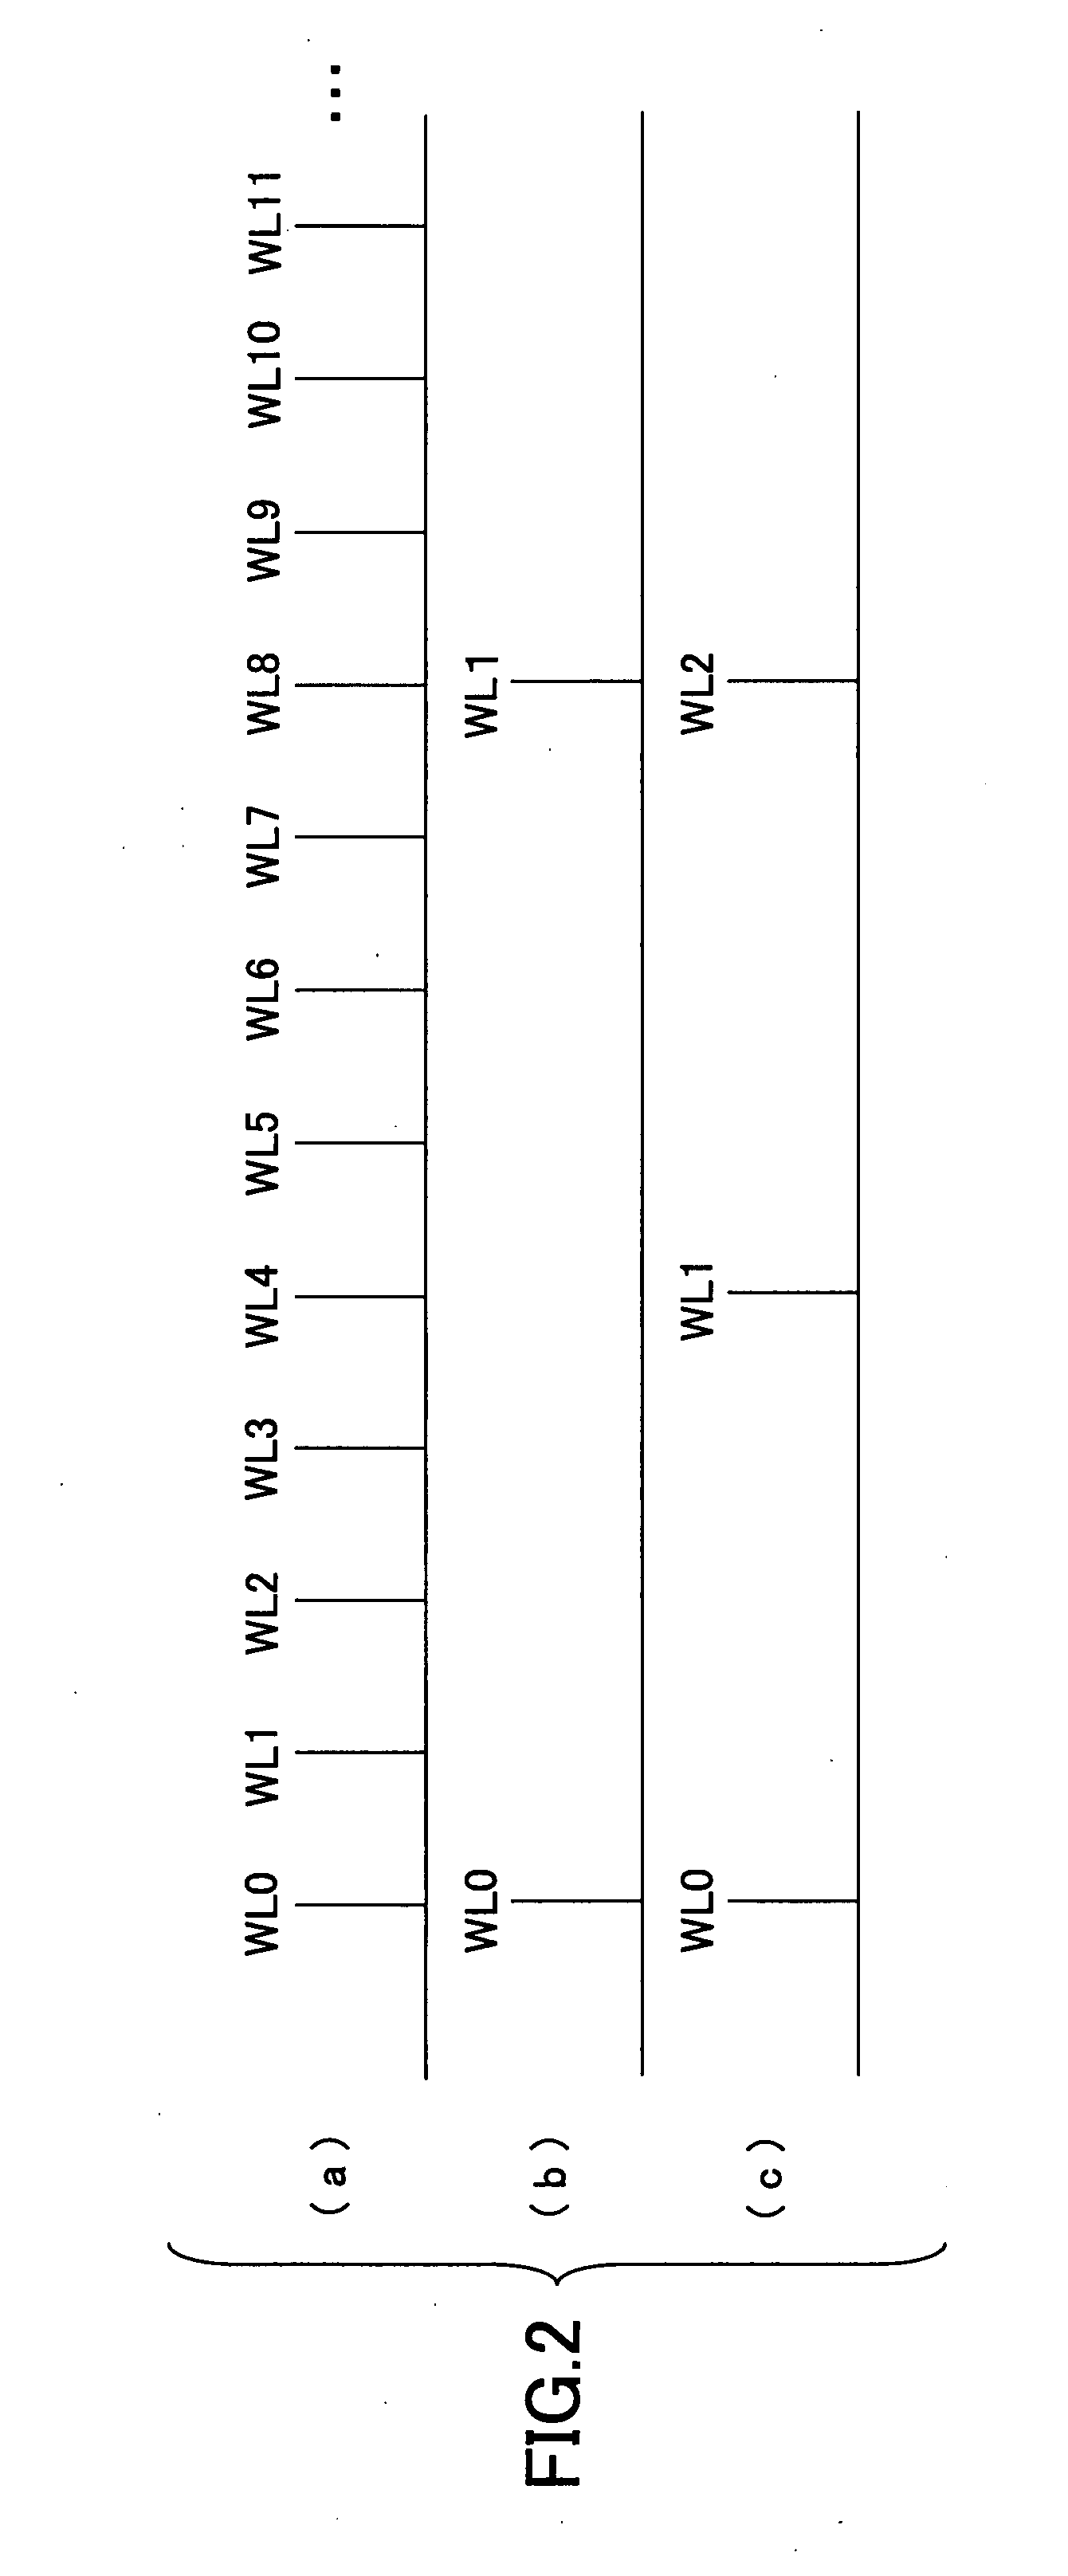 Semiconductor memory device with partial refresh function